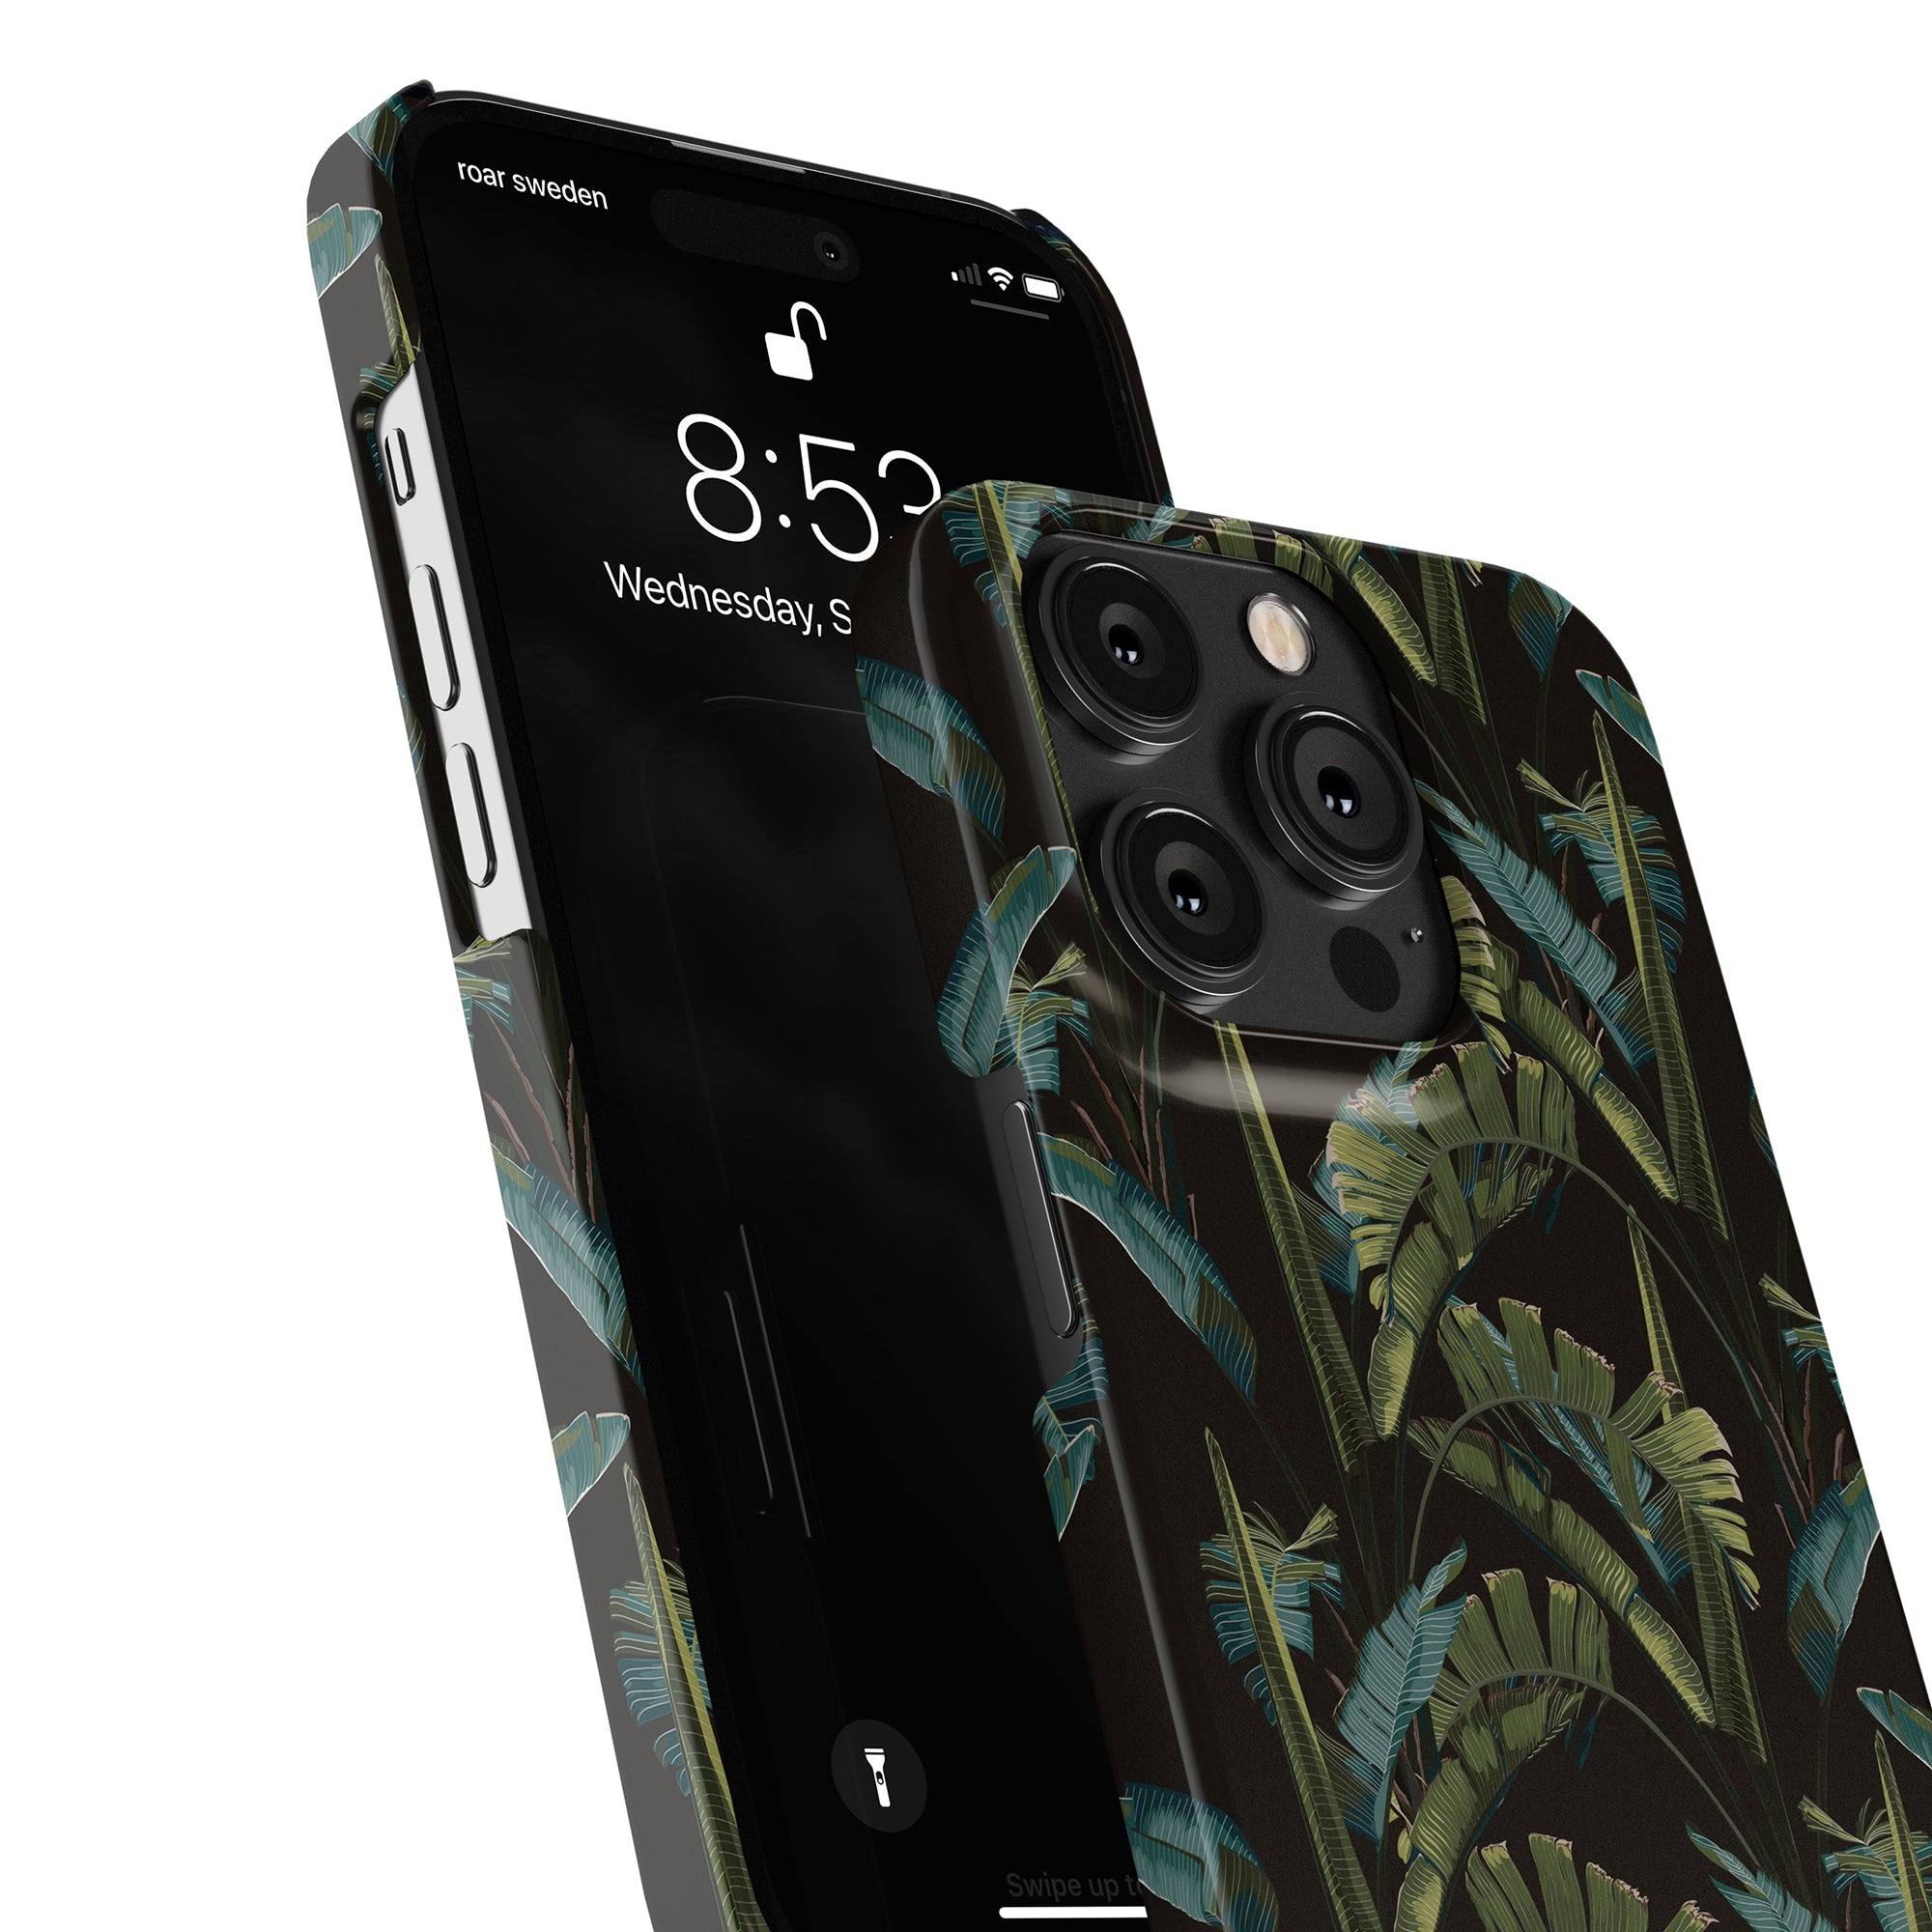 Modern smartphone with a Mystic Jungle - Slim case viewed from an angle showcasing its screen and rear camera setup.